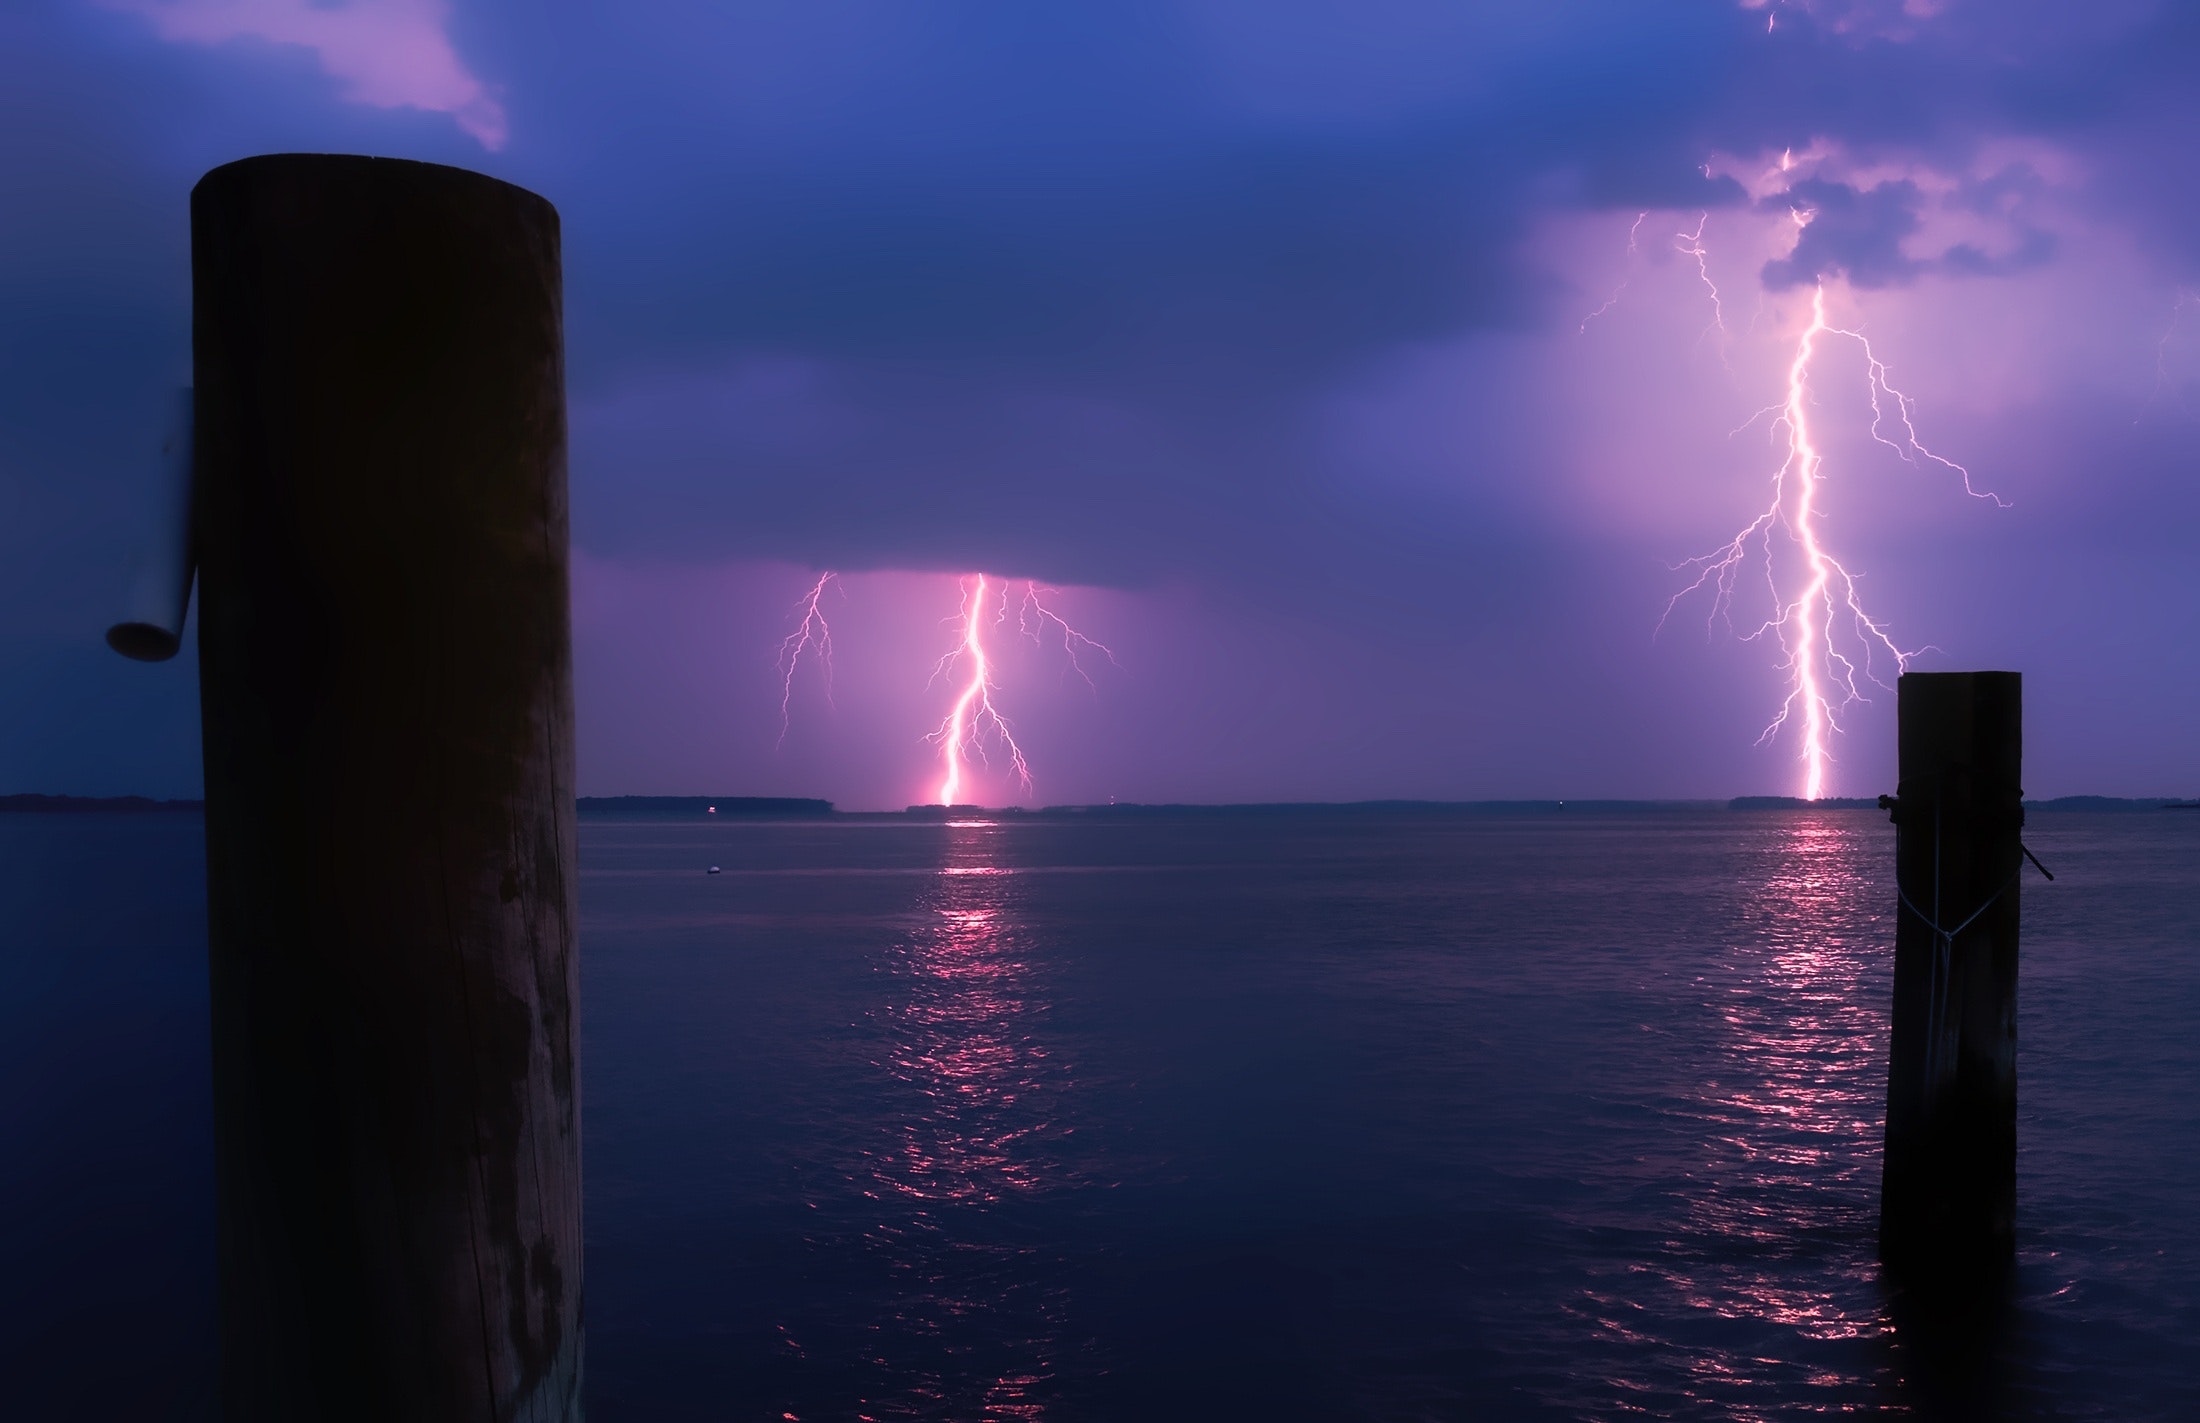 Lightning over Sea Against Storm Clouds, Beach, Weather, Water, Travel, HQ Photo